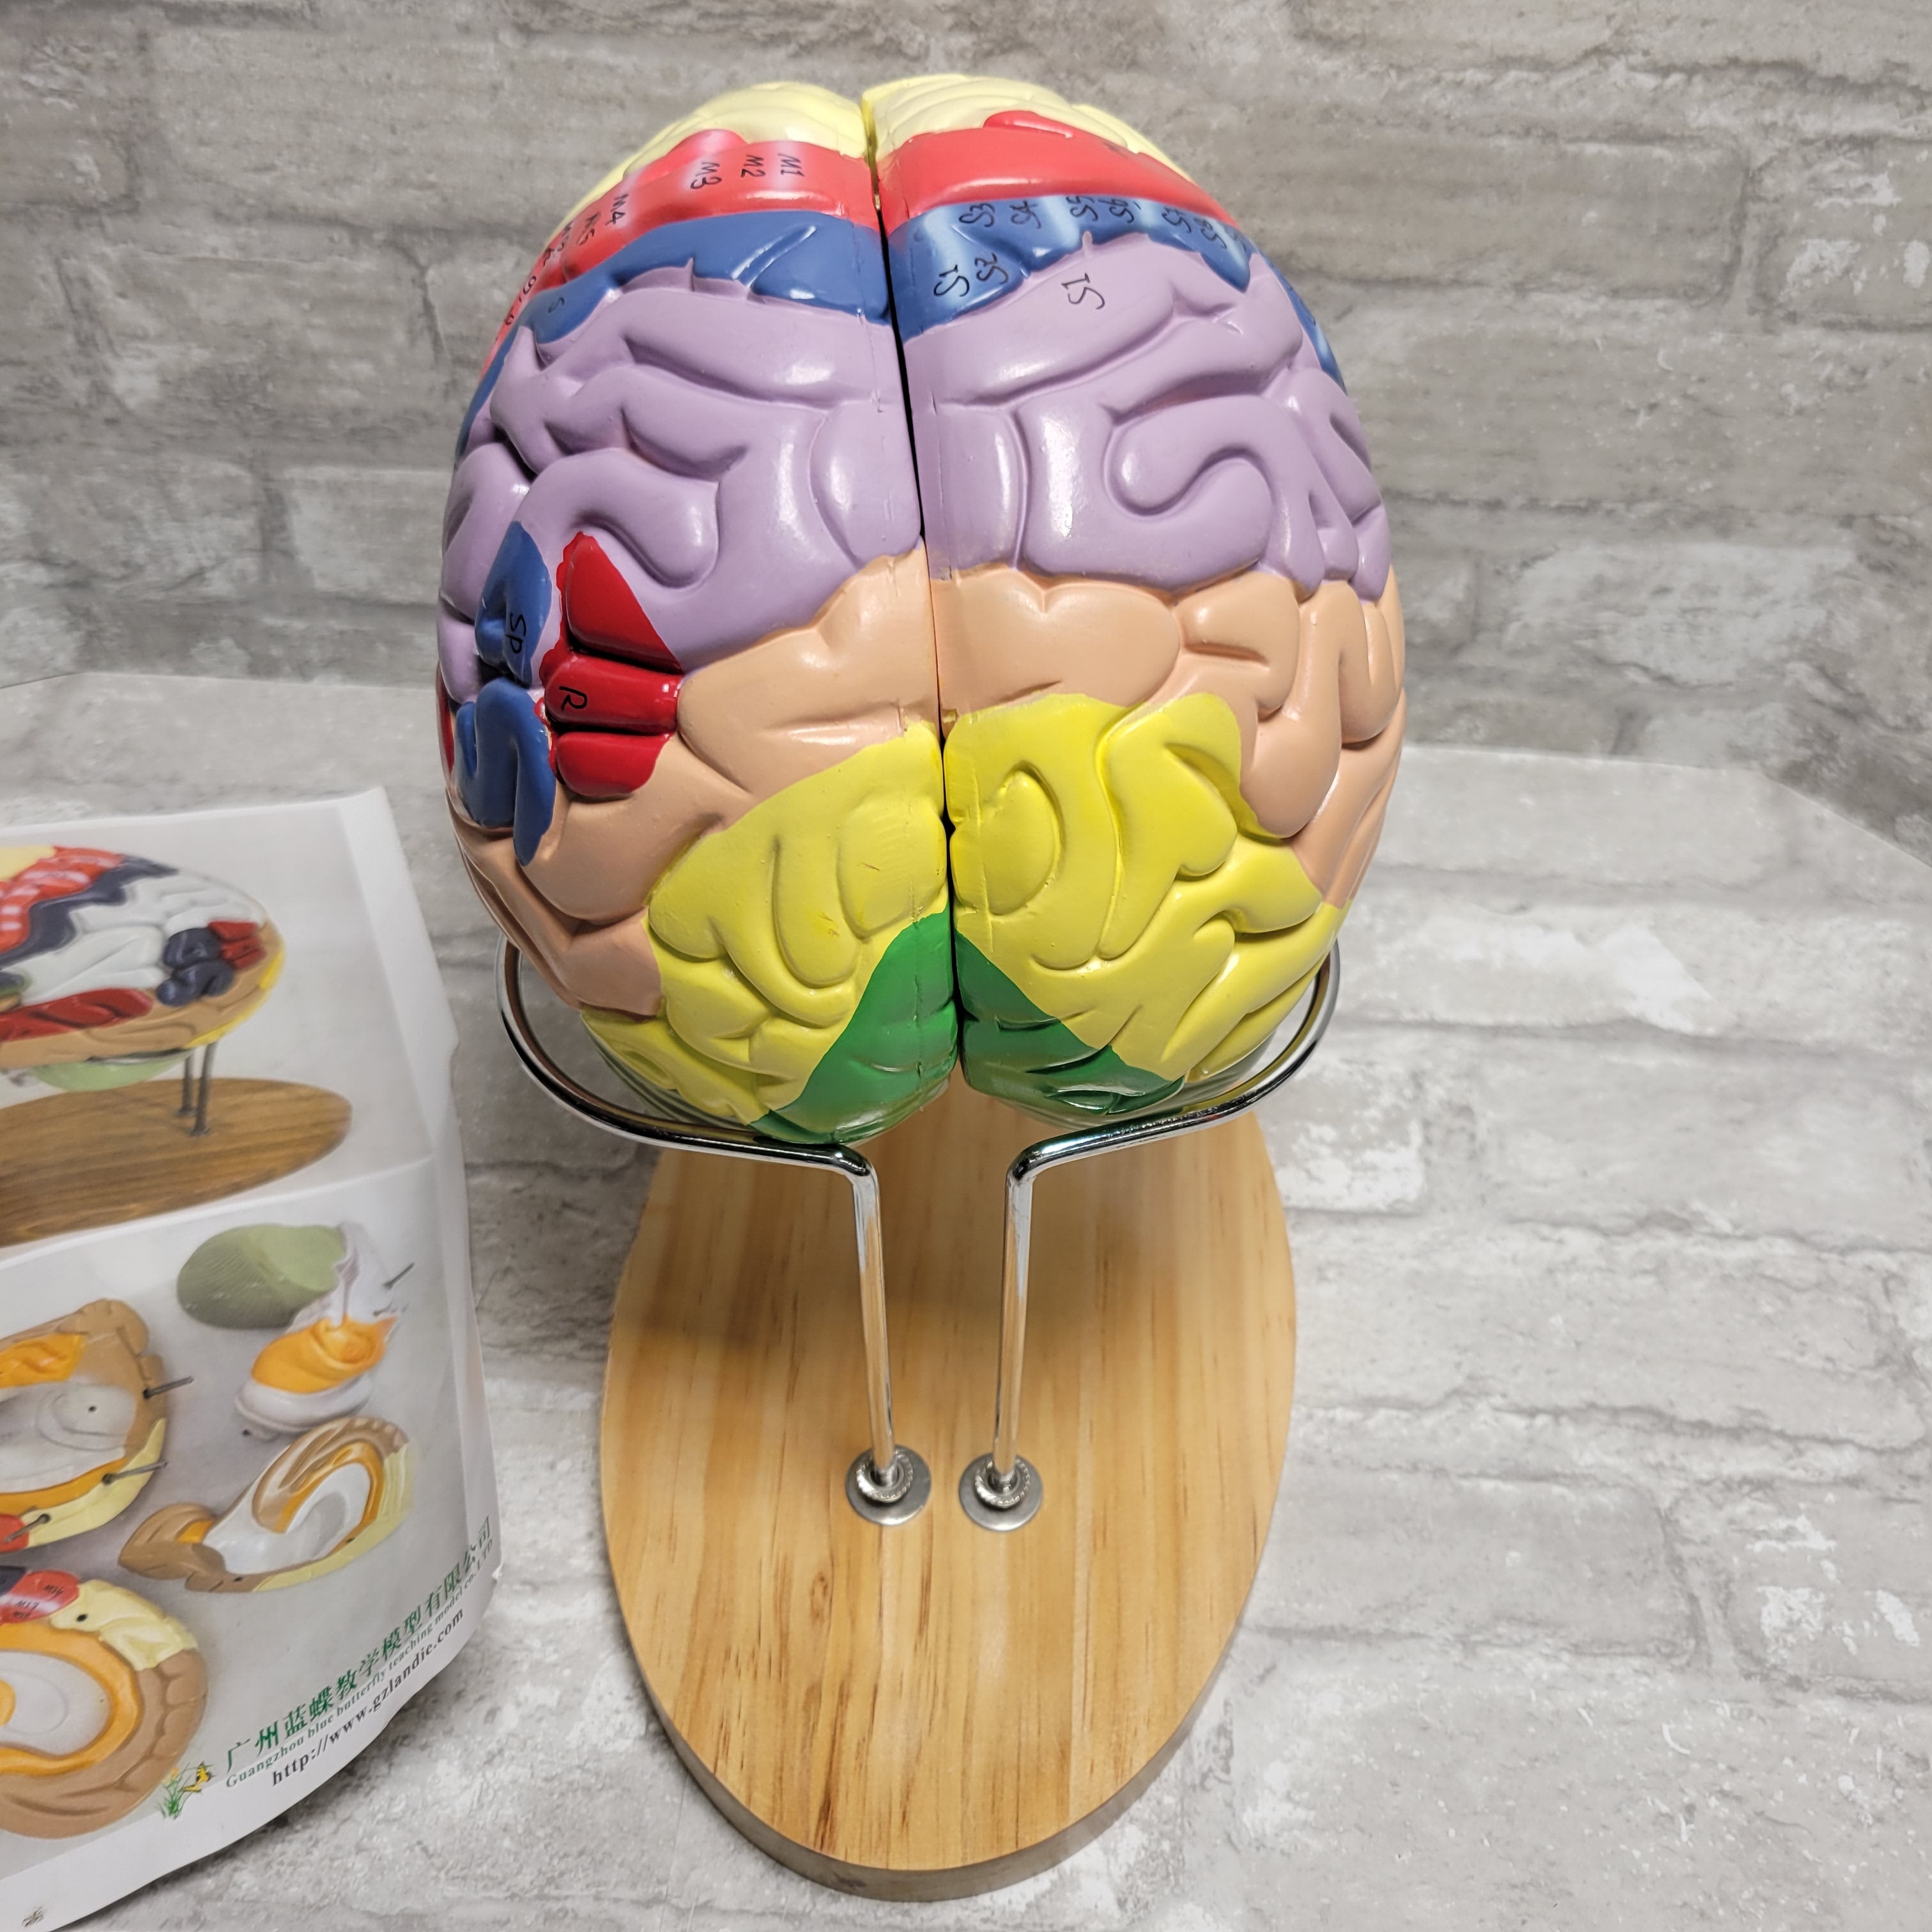 Human Brain Model - 4 Parts -2x Life Size- With Labels & Stand (8046010007790)